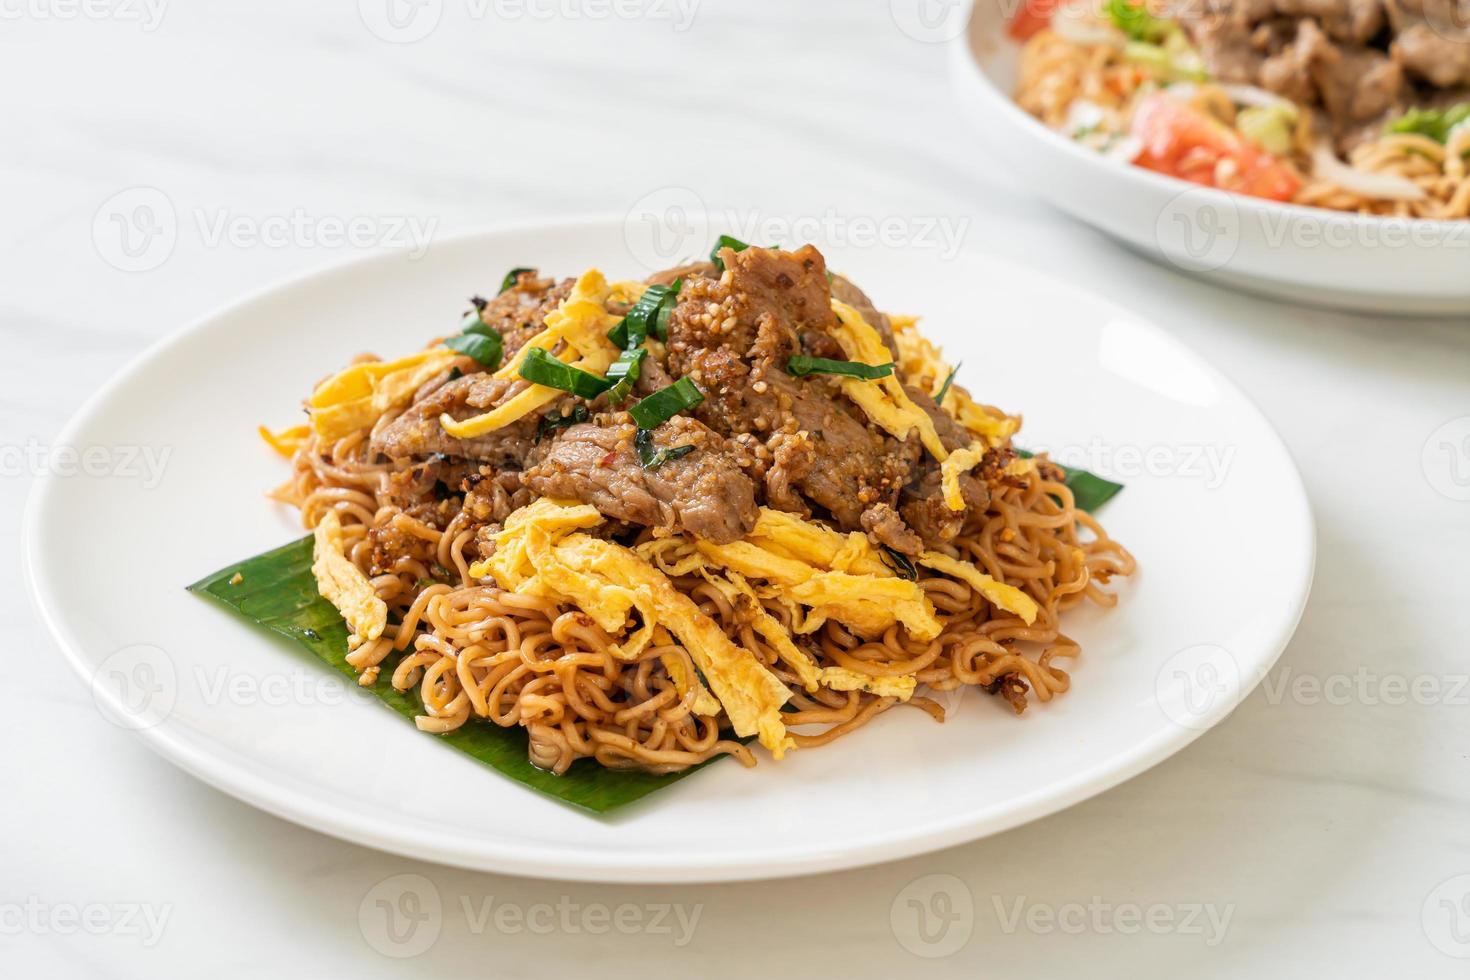 Stir-fried instant noodle with pork and egg - Asian local street food style photo